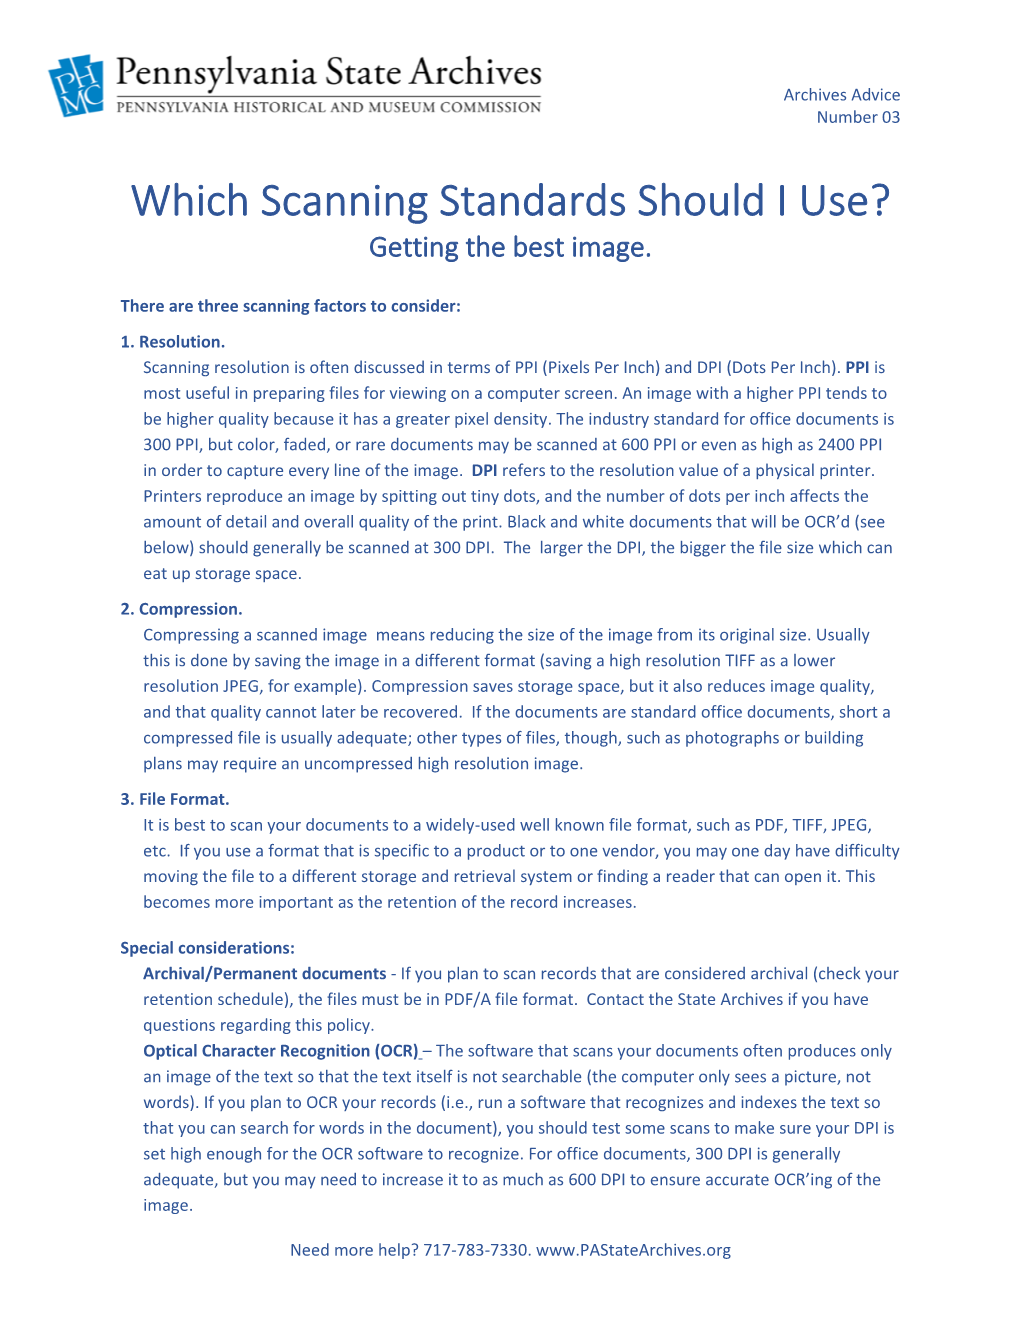 Which Scanning Standards Should I Use? Getting the Best Image